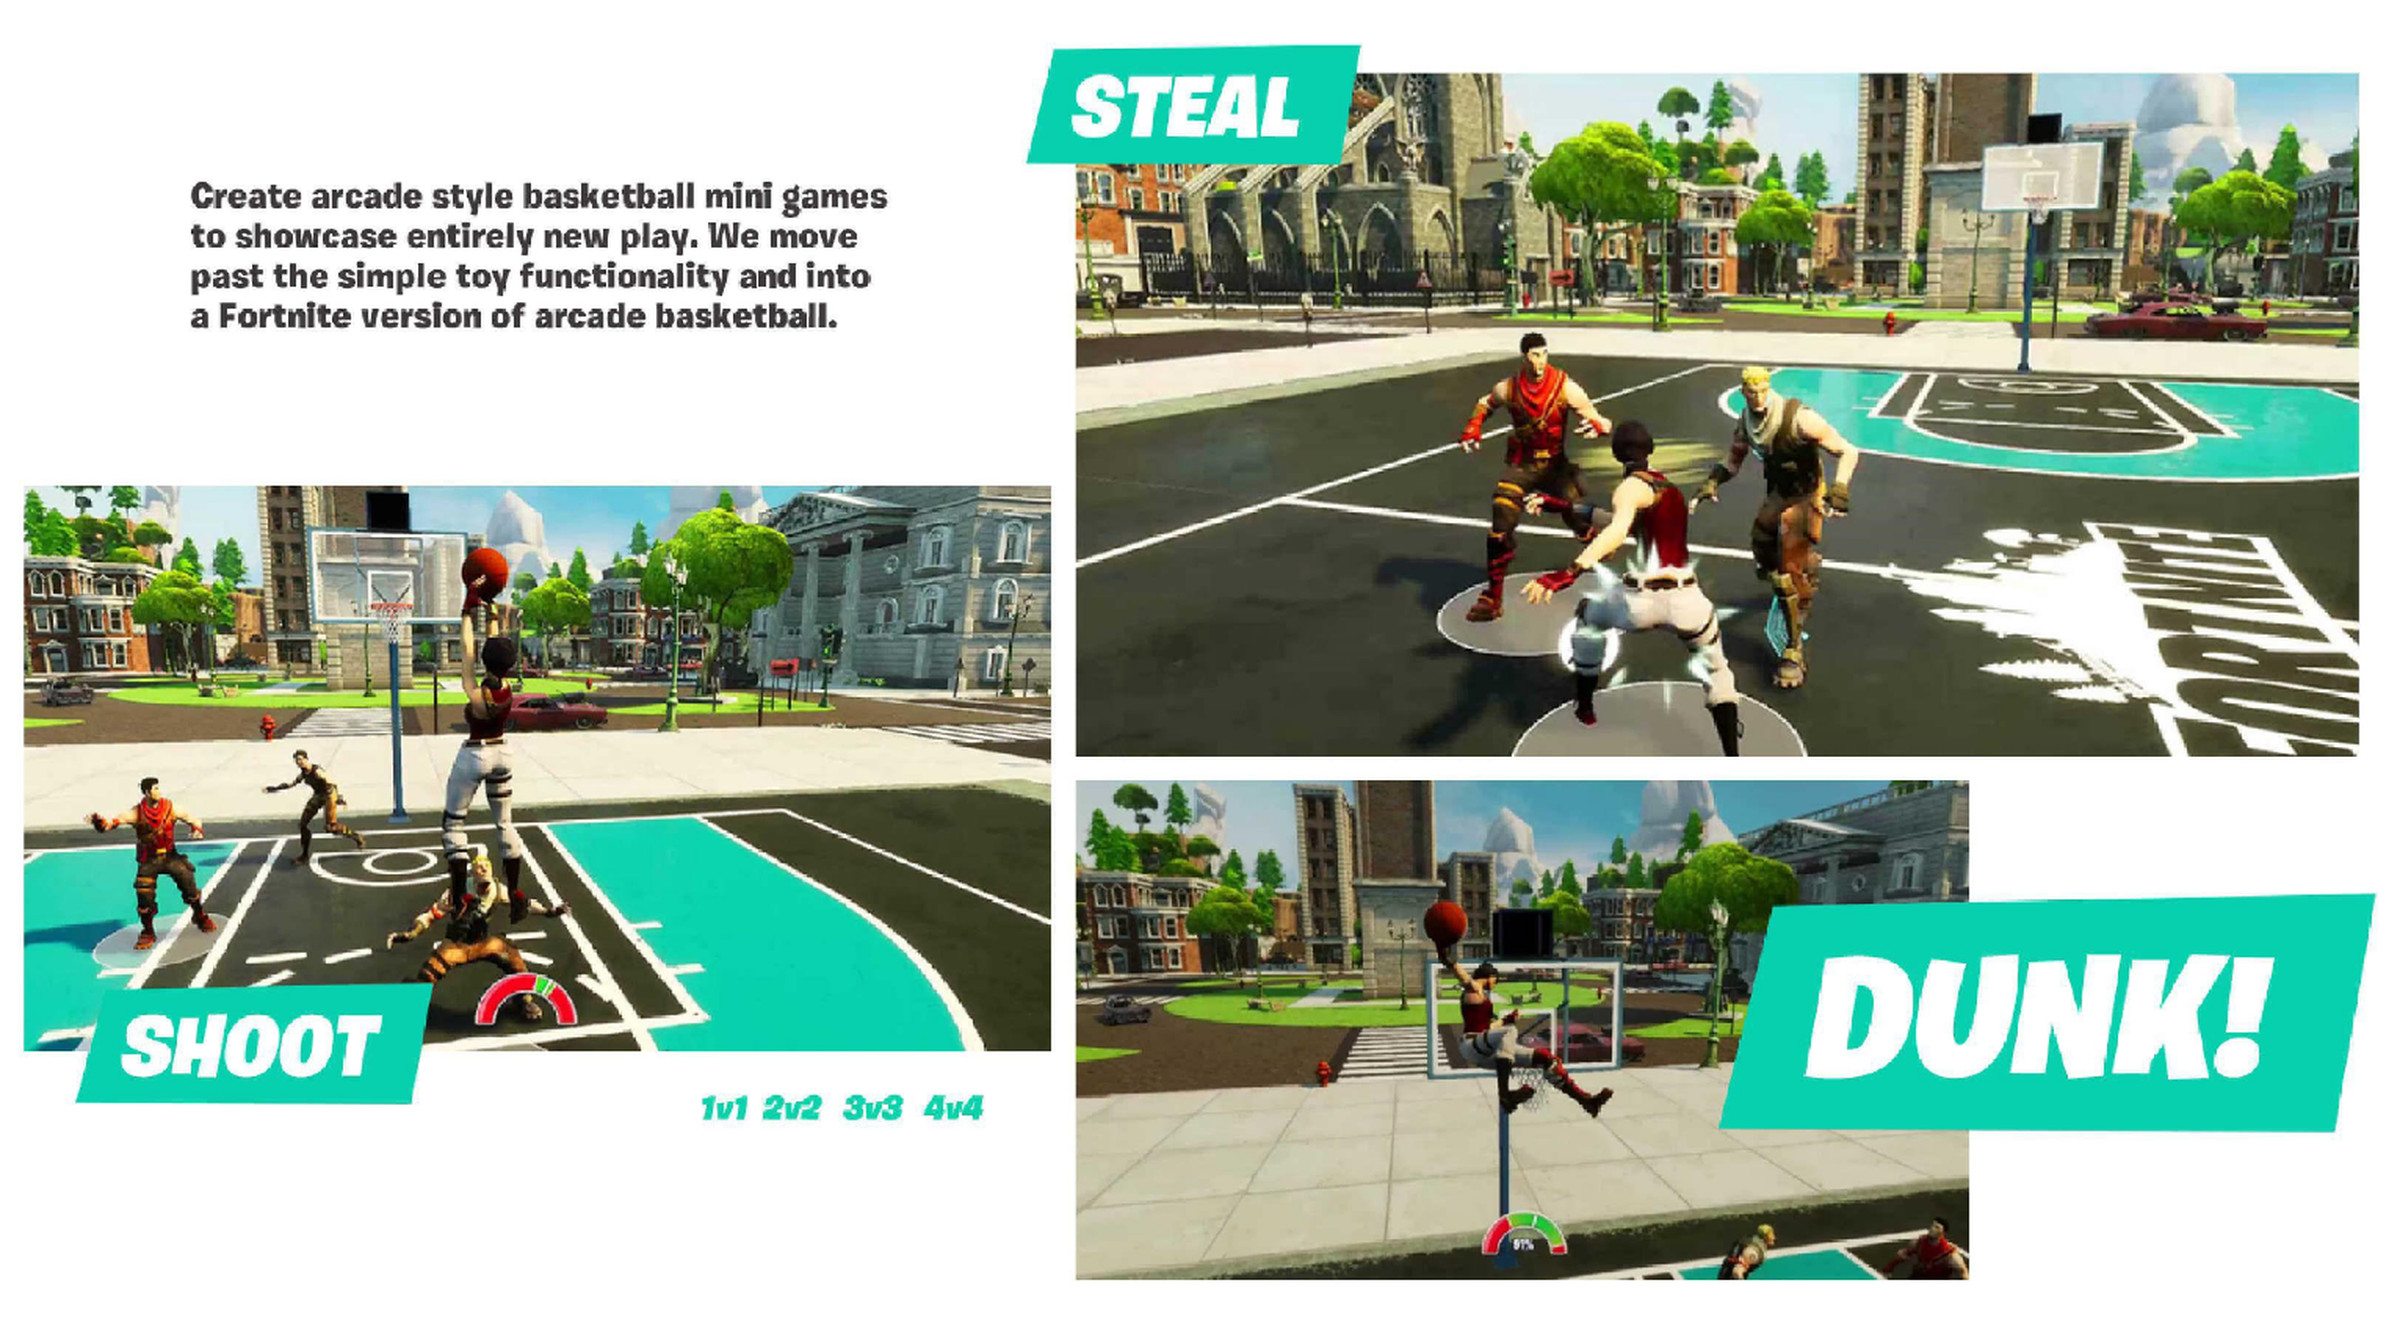 A slide detailing the planned basketball mini-game, including the text “Create arcade style basketball mini games to showcase entirely new play. We move past the simply toy functionality and into a Fortnite version of arcade basketball”